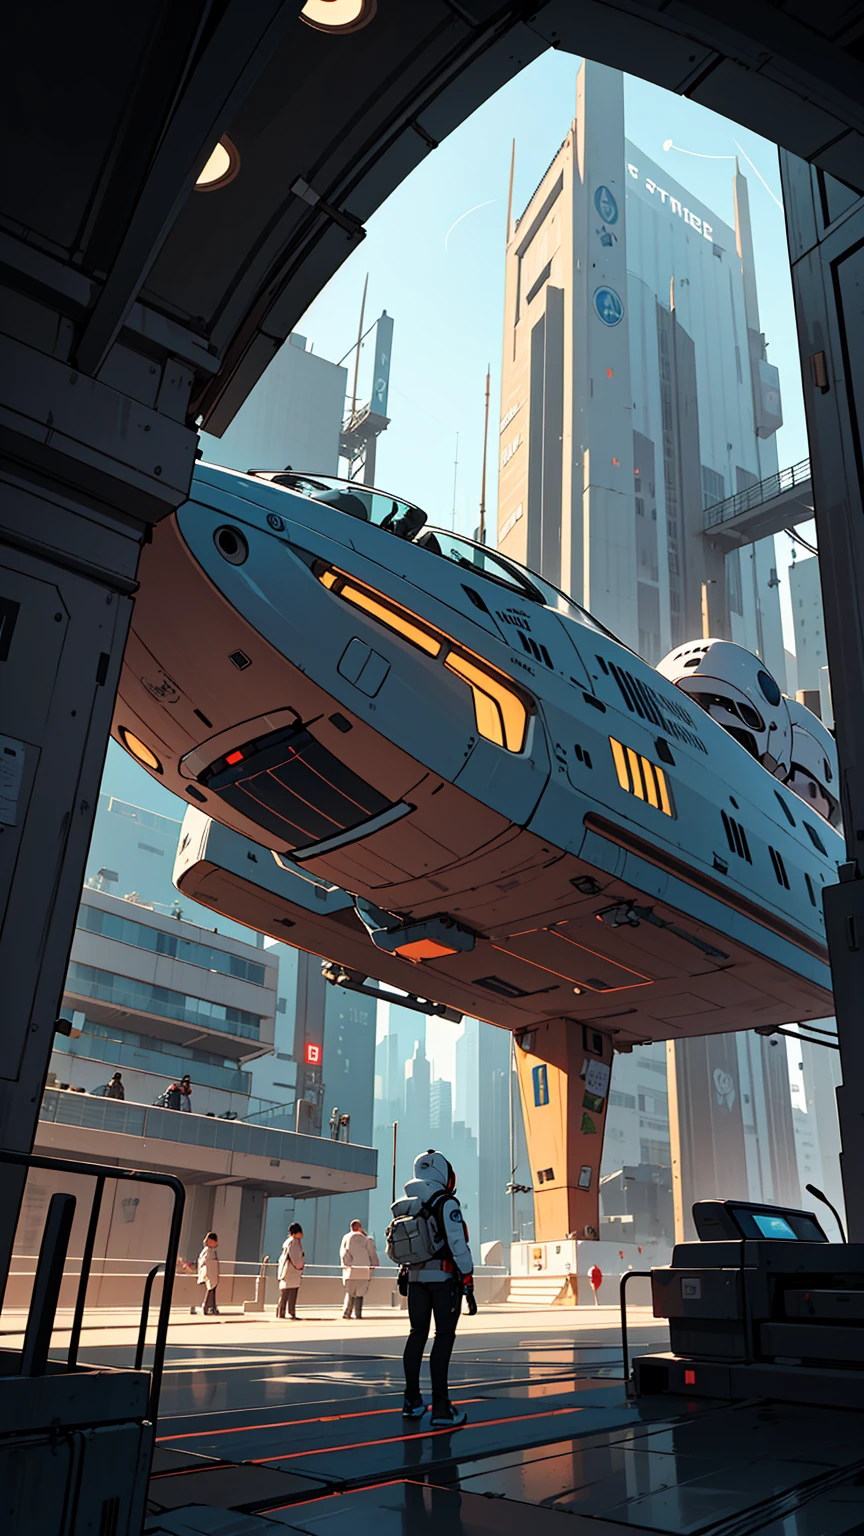 (Best Quality, 4k, ultra detailed, high resolution, Masterpiece: 1.2),(wide angle, Character in the distance in a futuristic building.:1.5), There is a character seen from afar., located on a high observation point:1.4. It is small compared to the surroundings.., highlighting the magnitude of the ship. The character is equipped with a space suit.:1.5, with flashing lights and mechanical details.View of outer space: through the boat&#39;s openings, you see a vast starry space. The stars are unevenly distributed.., creating variable densities and suggesting the remoteness of some celestial objects.